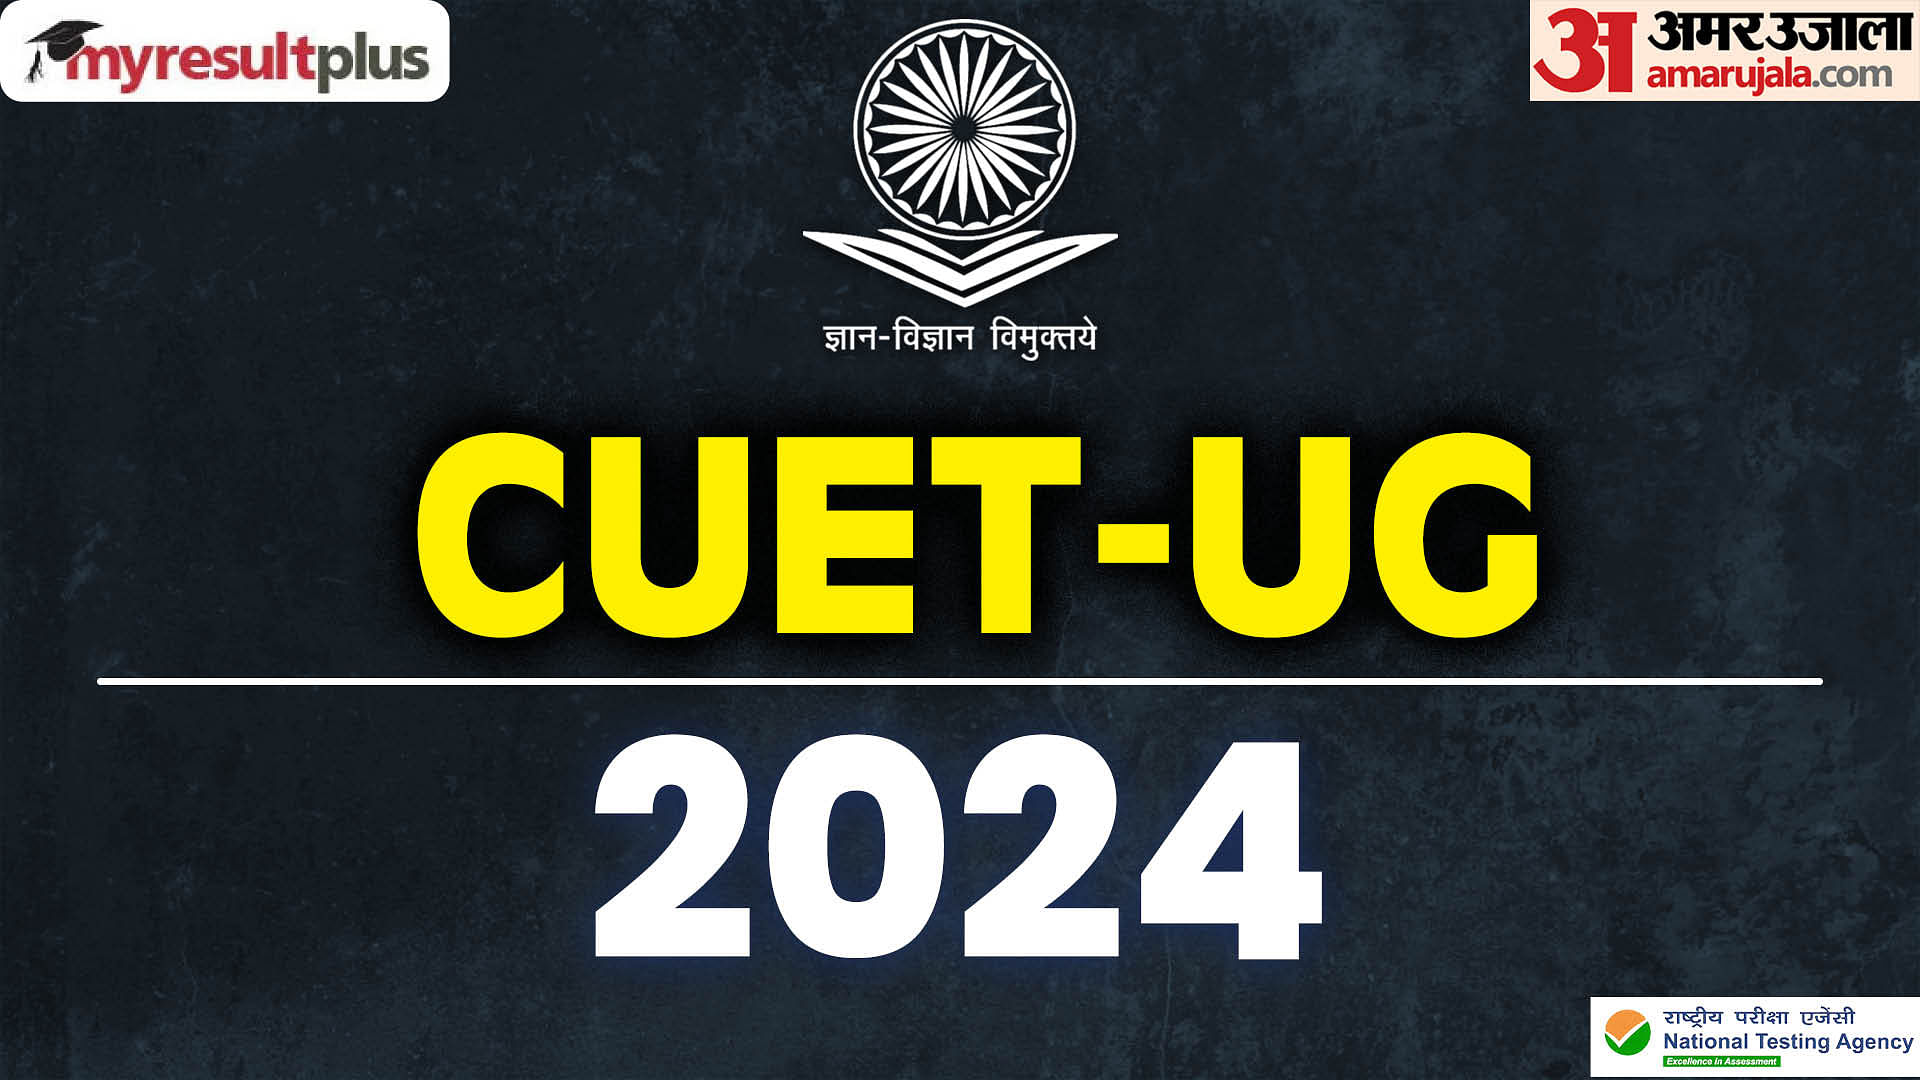 CUET UG 2024 admit card, city intimation slip releasing soon: Check date and other details here